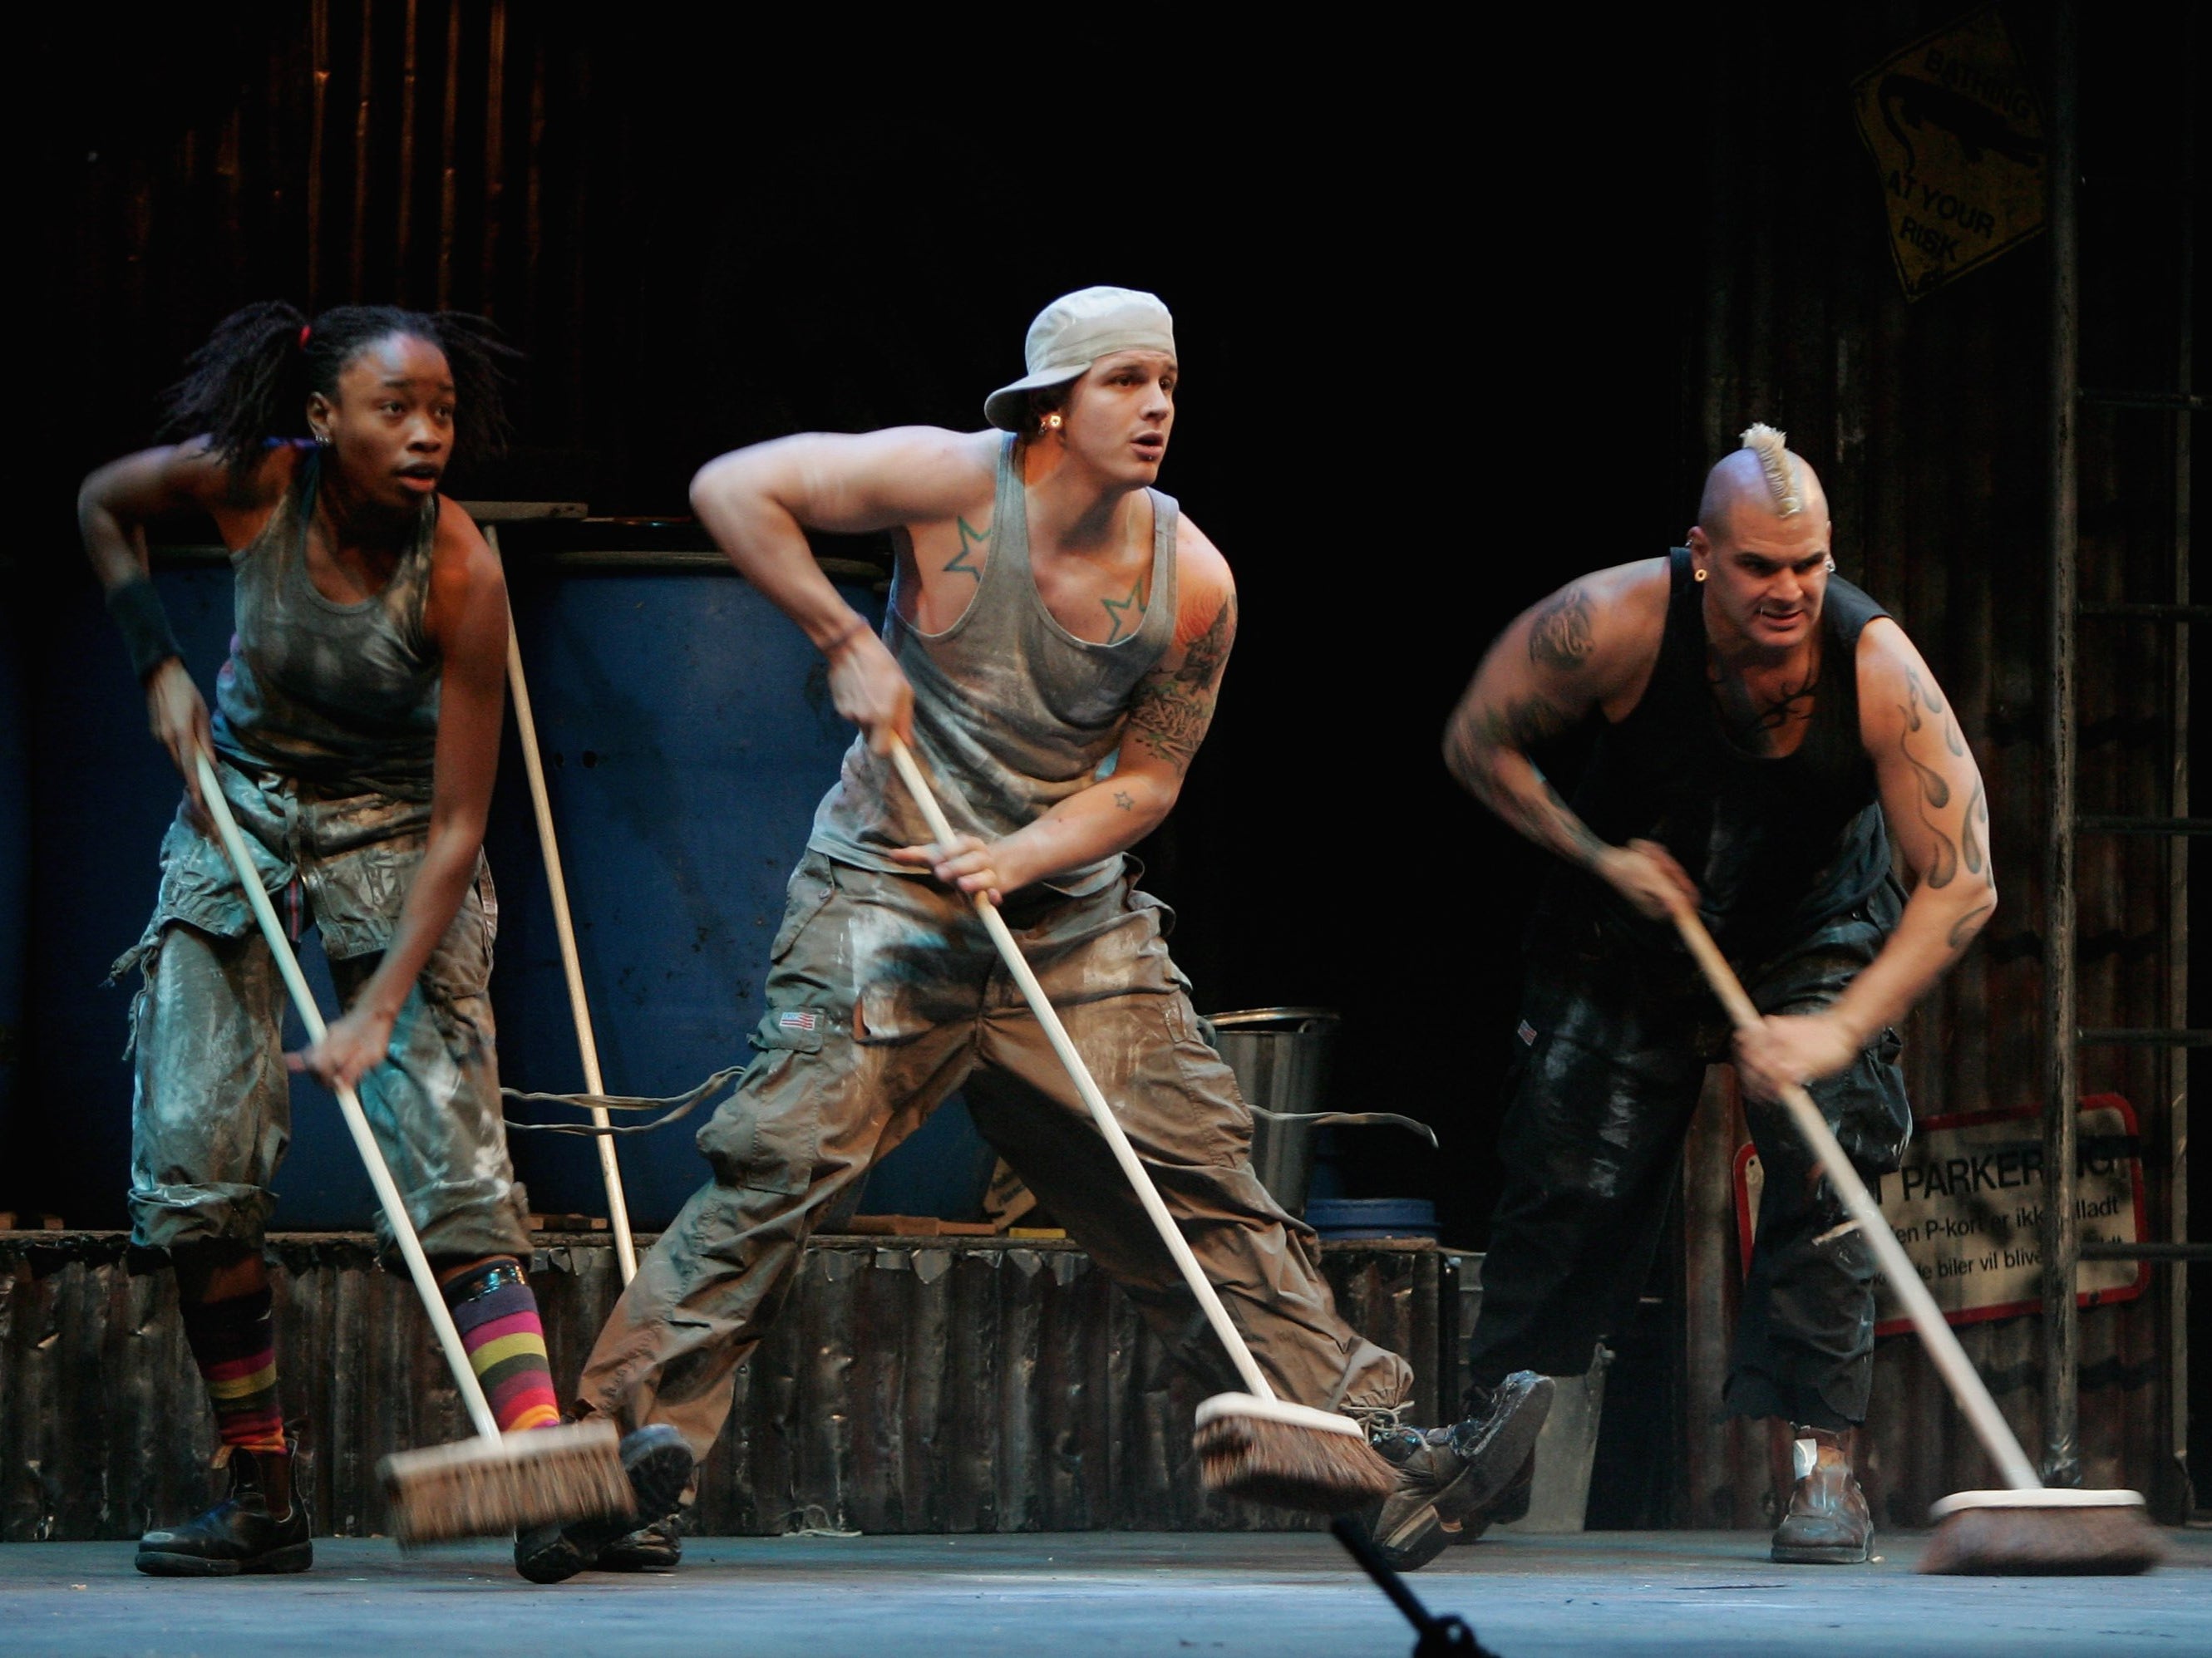 Performers using brooms as percussive instruments during a performance of ‘Stomp’ in Berlin, Germany